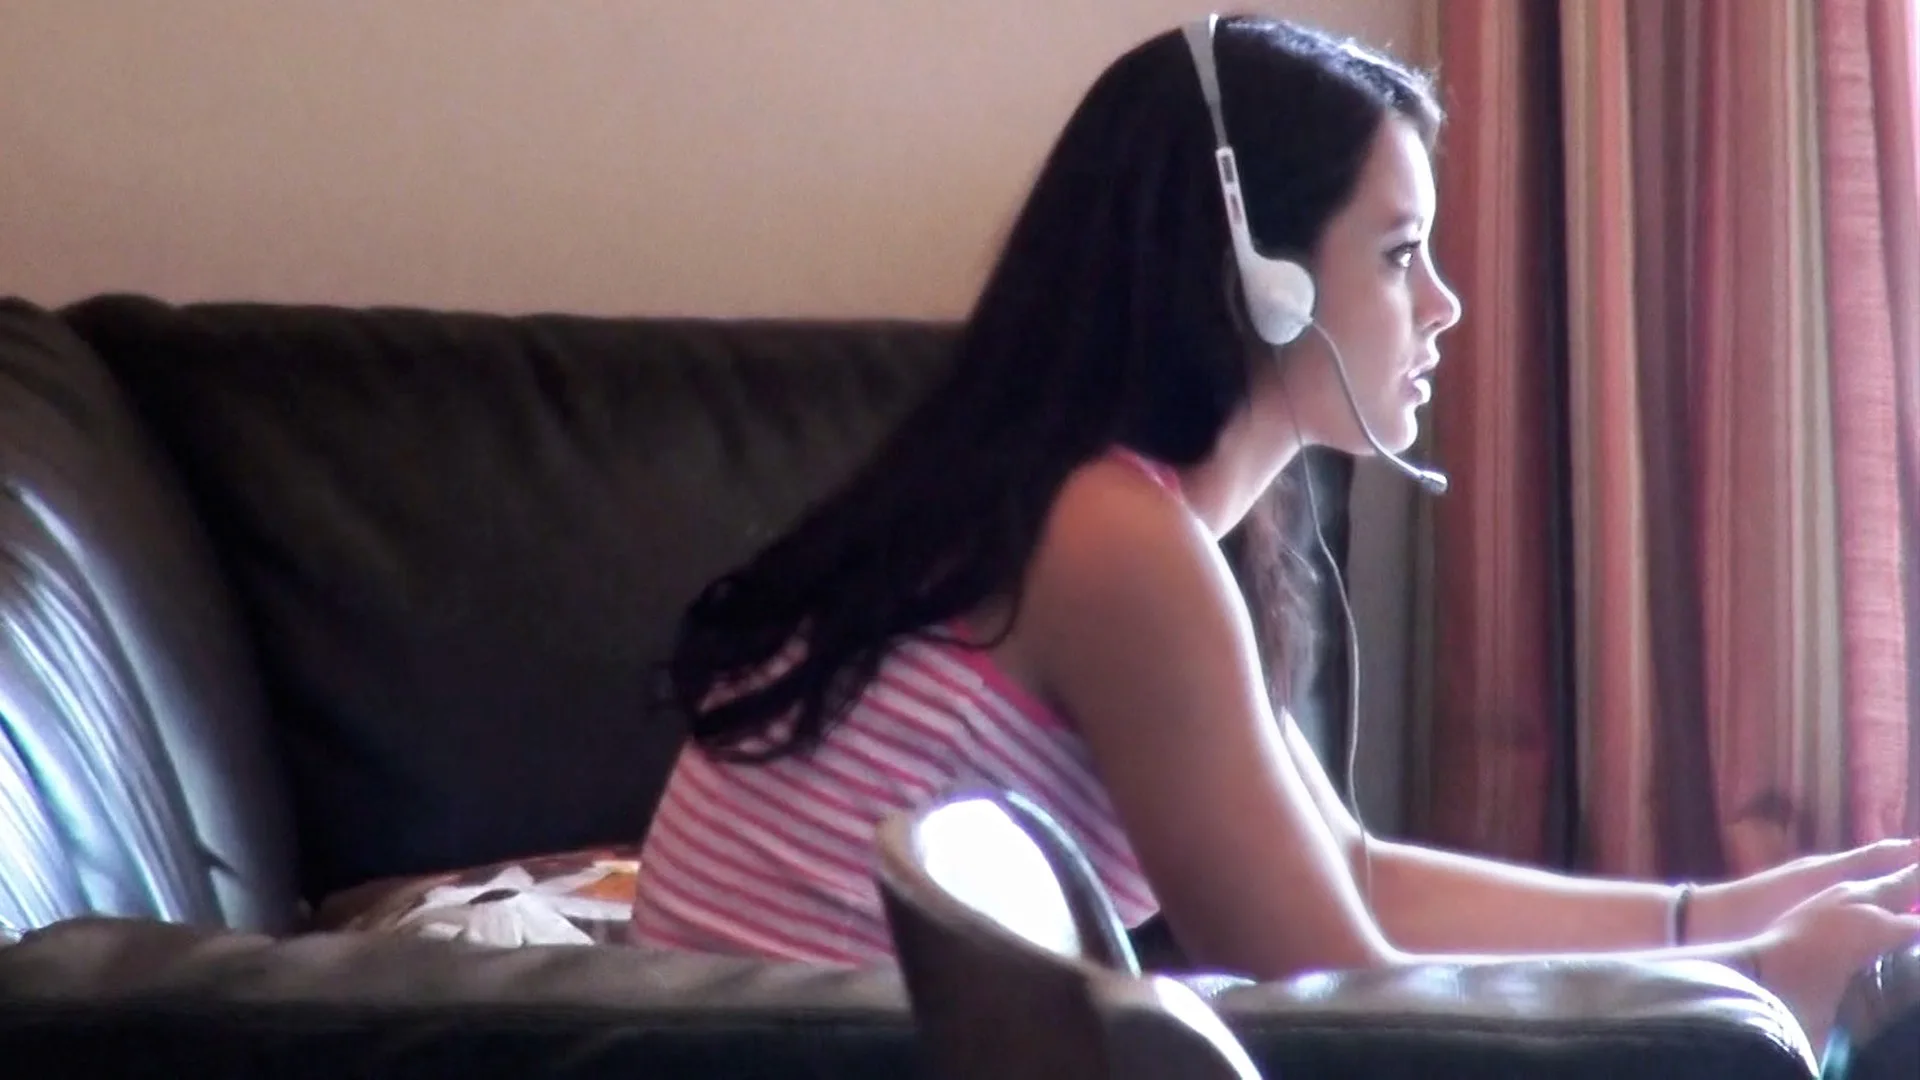 Don't Mess With a Gamer Chick - Latina Sex Tapes